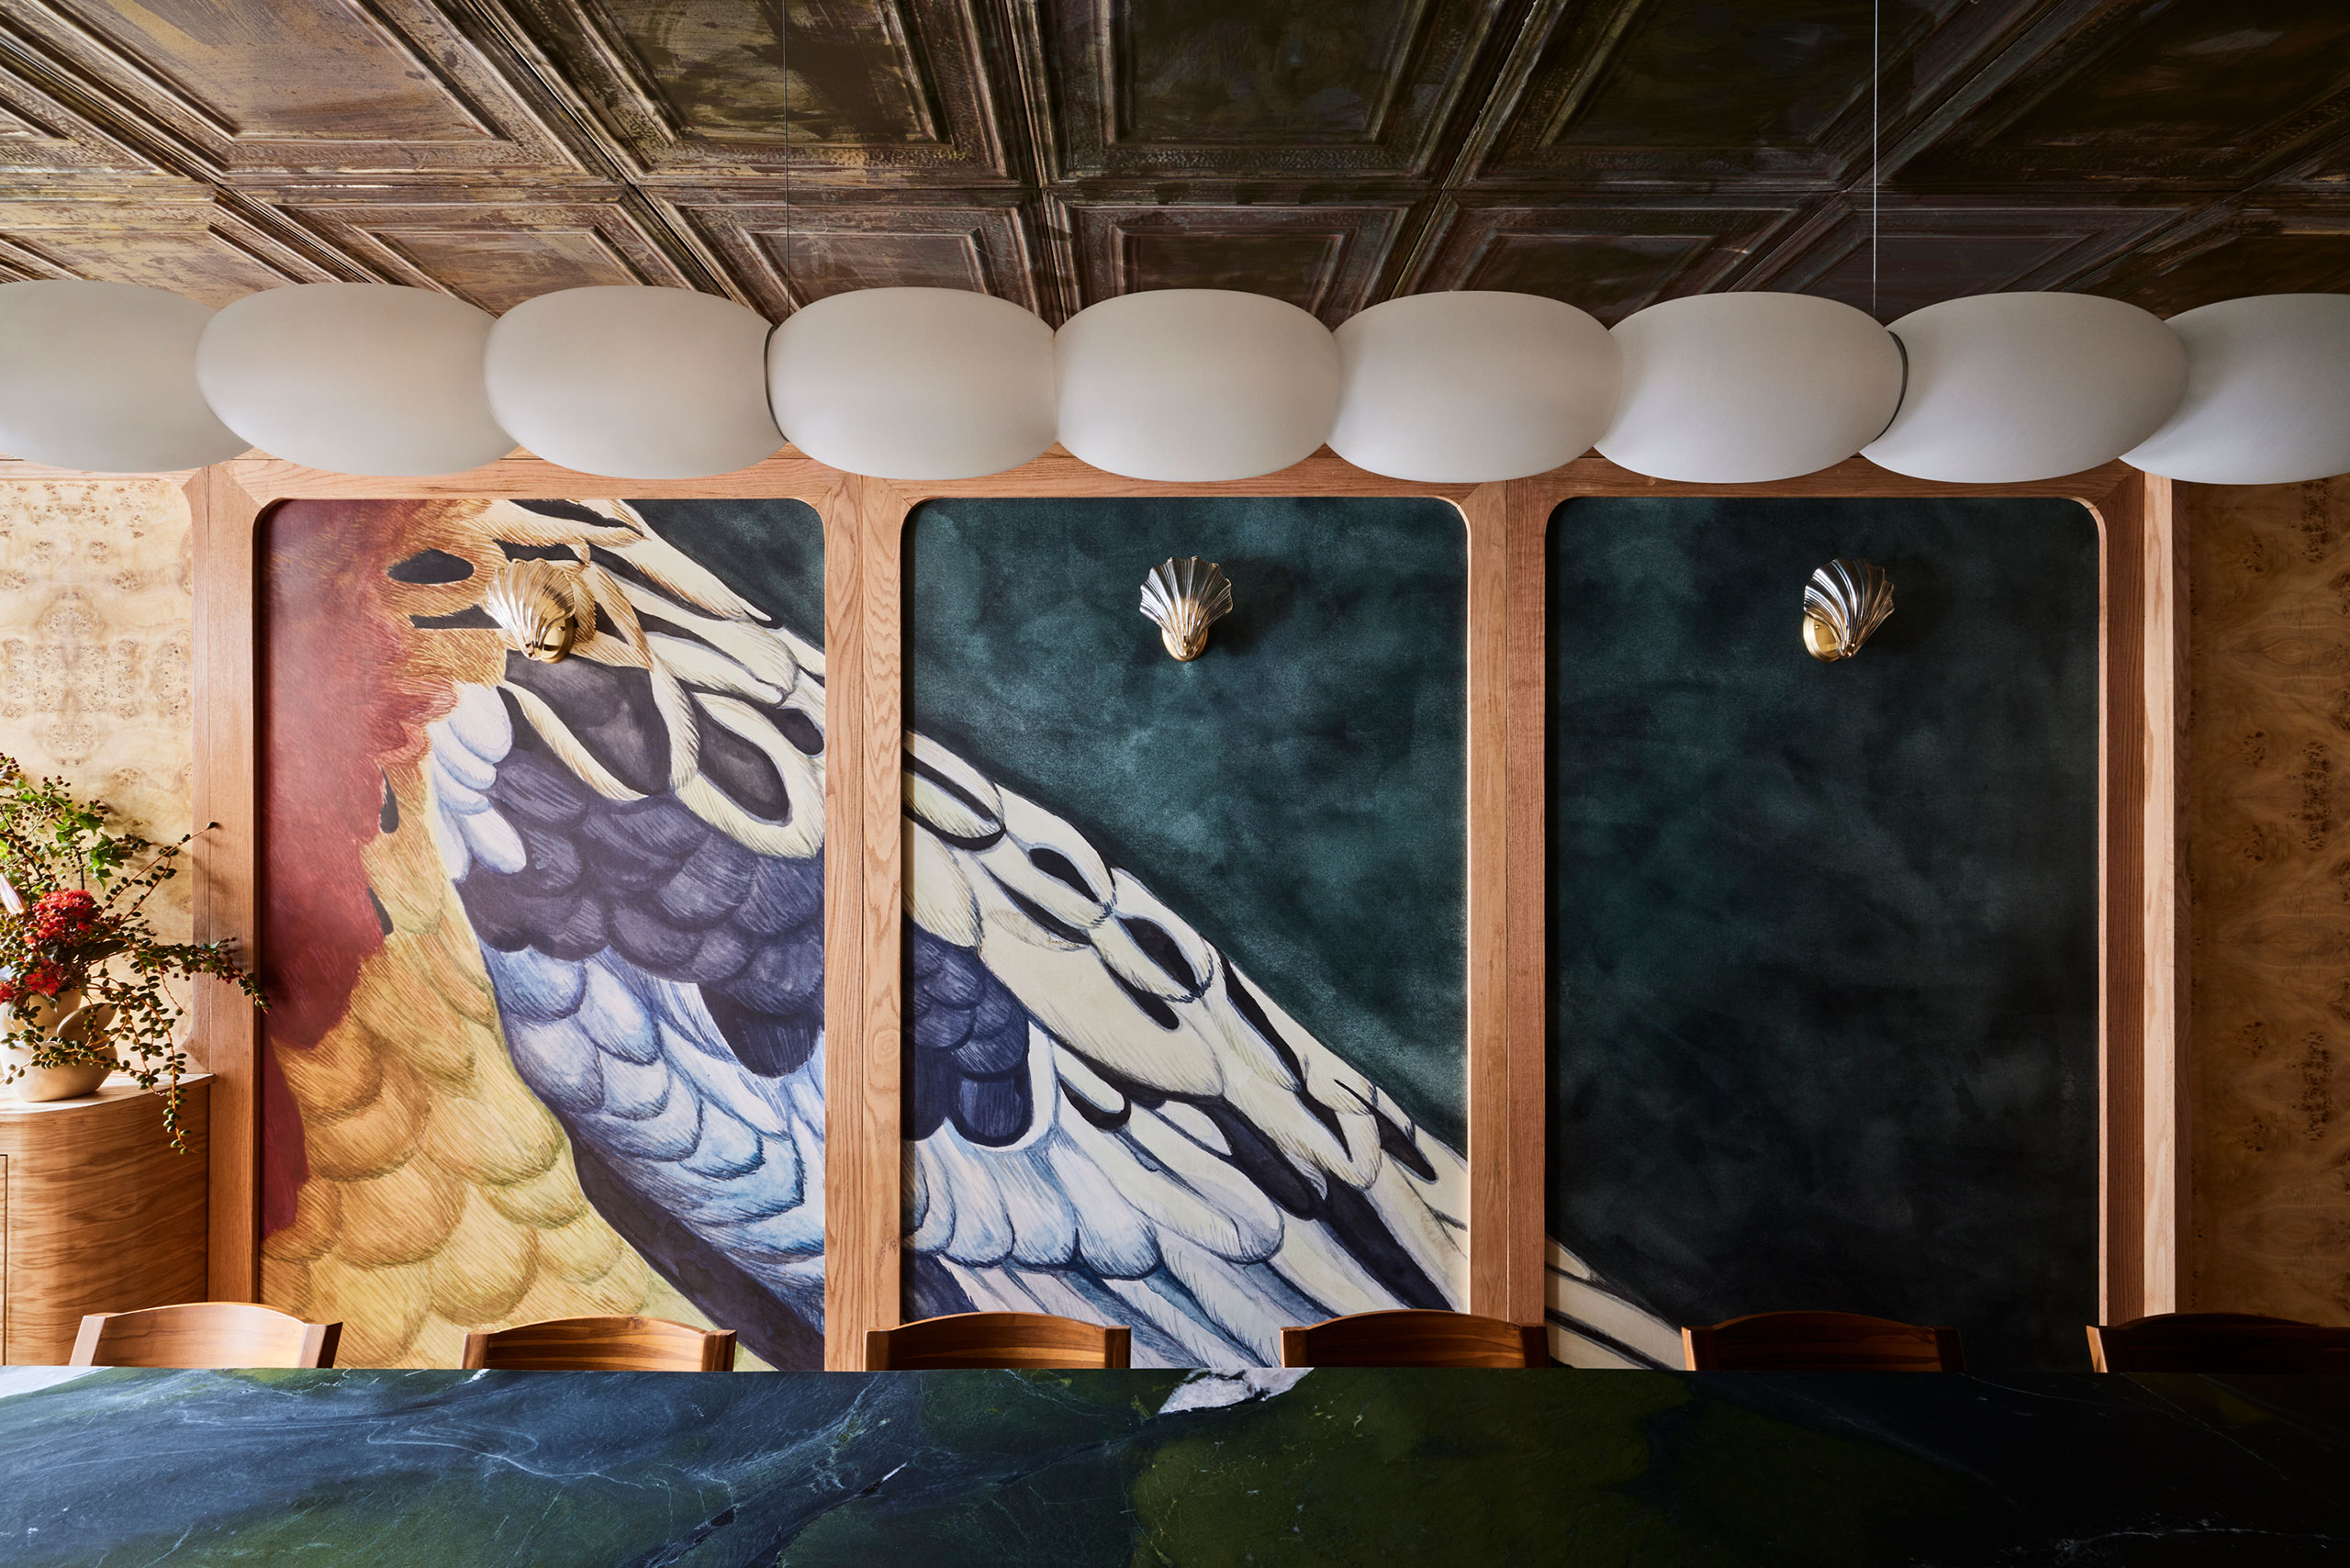 Wallpaper mural created by Polonsky &amp; Friends based on watercolour painting by Hollie Kelley; Light pendant by Pablo Bolumar.
Photography by Nicole Franzen.